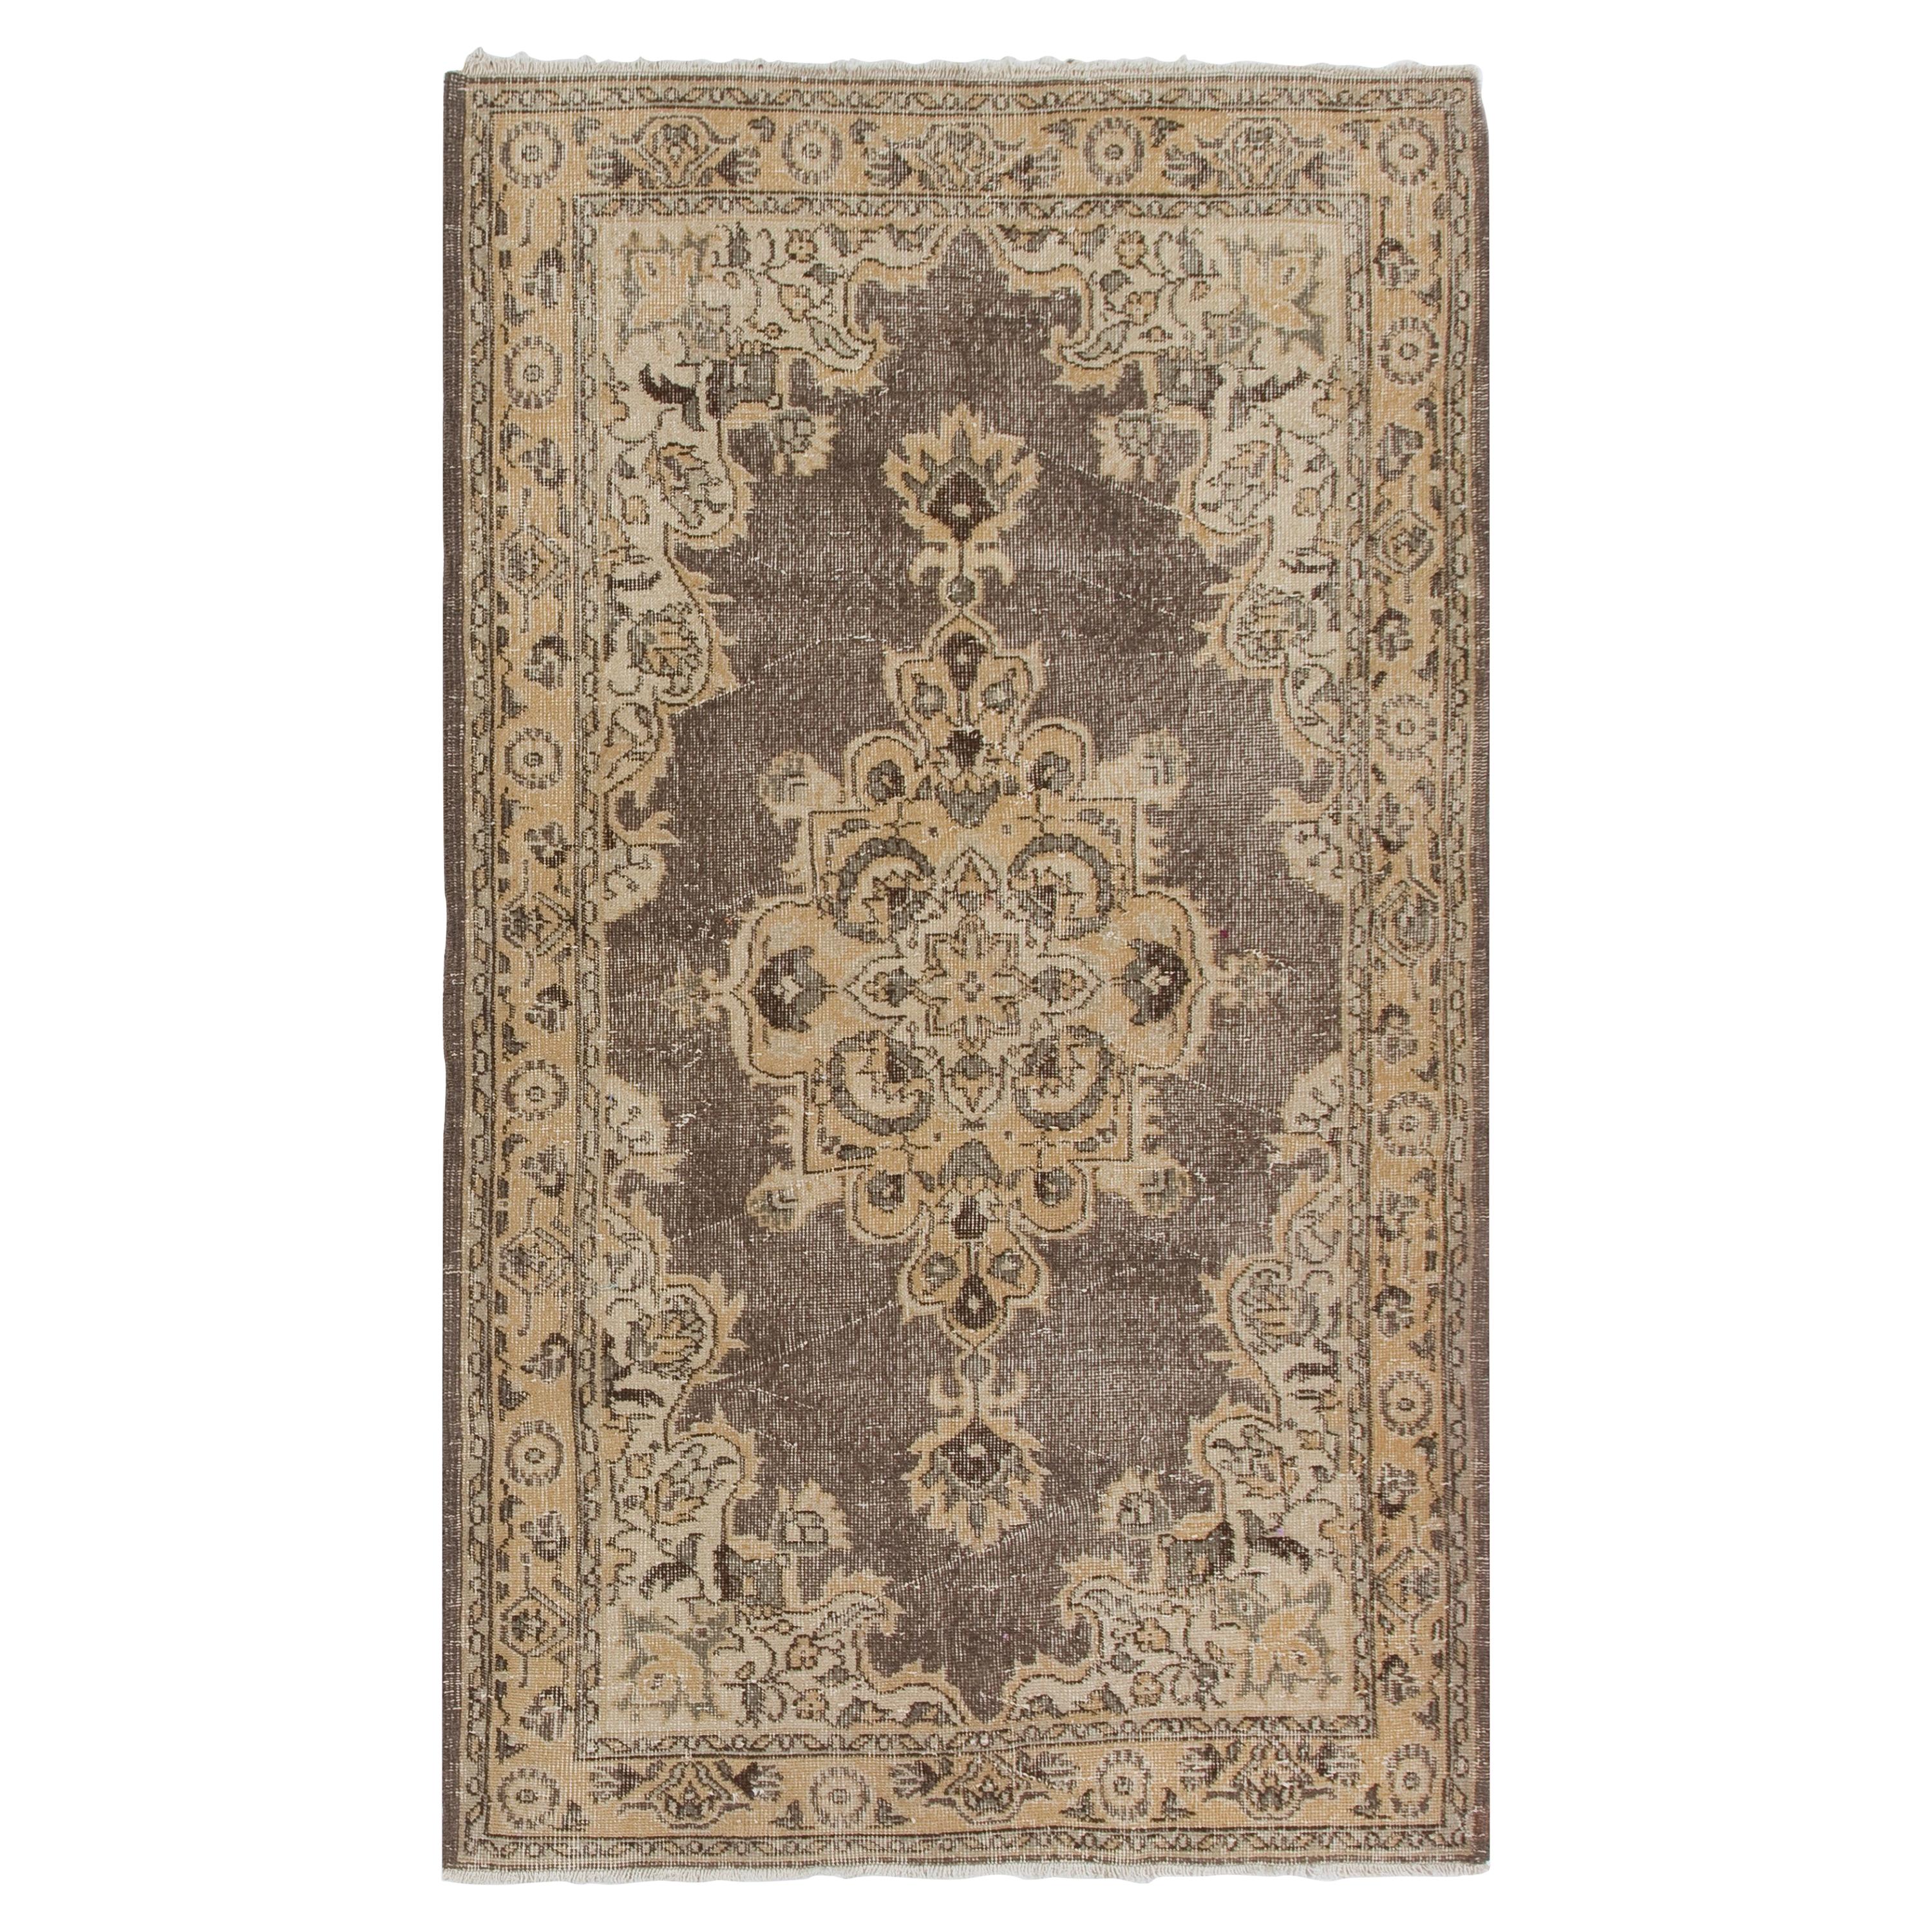 4x6.8 Ft Vintage Hand-Knotted Distressed Wool Accent Rug in Earthy Colors